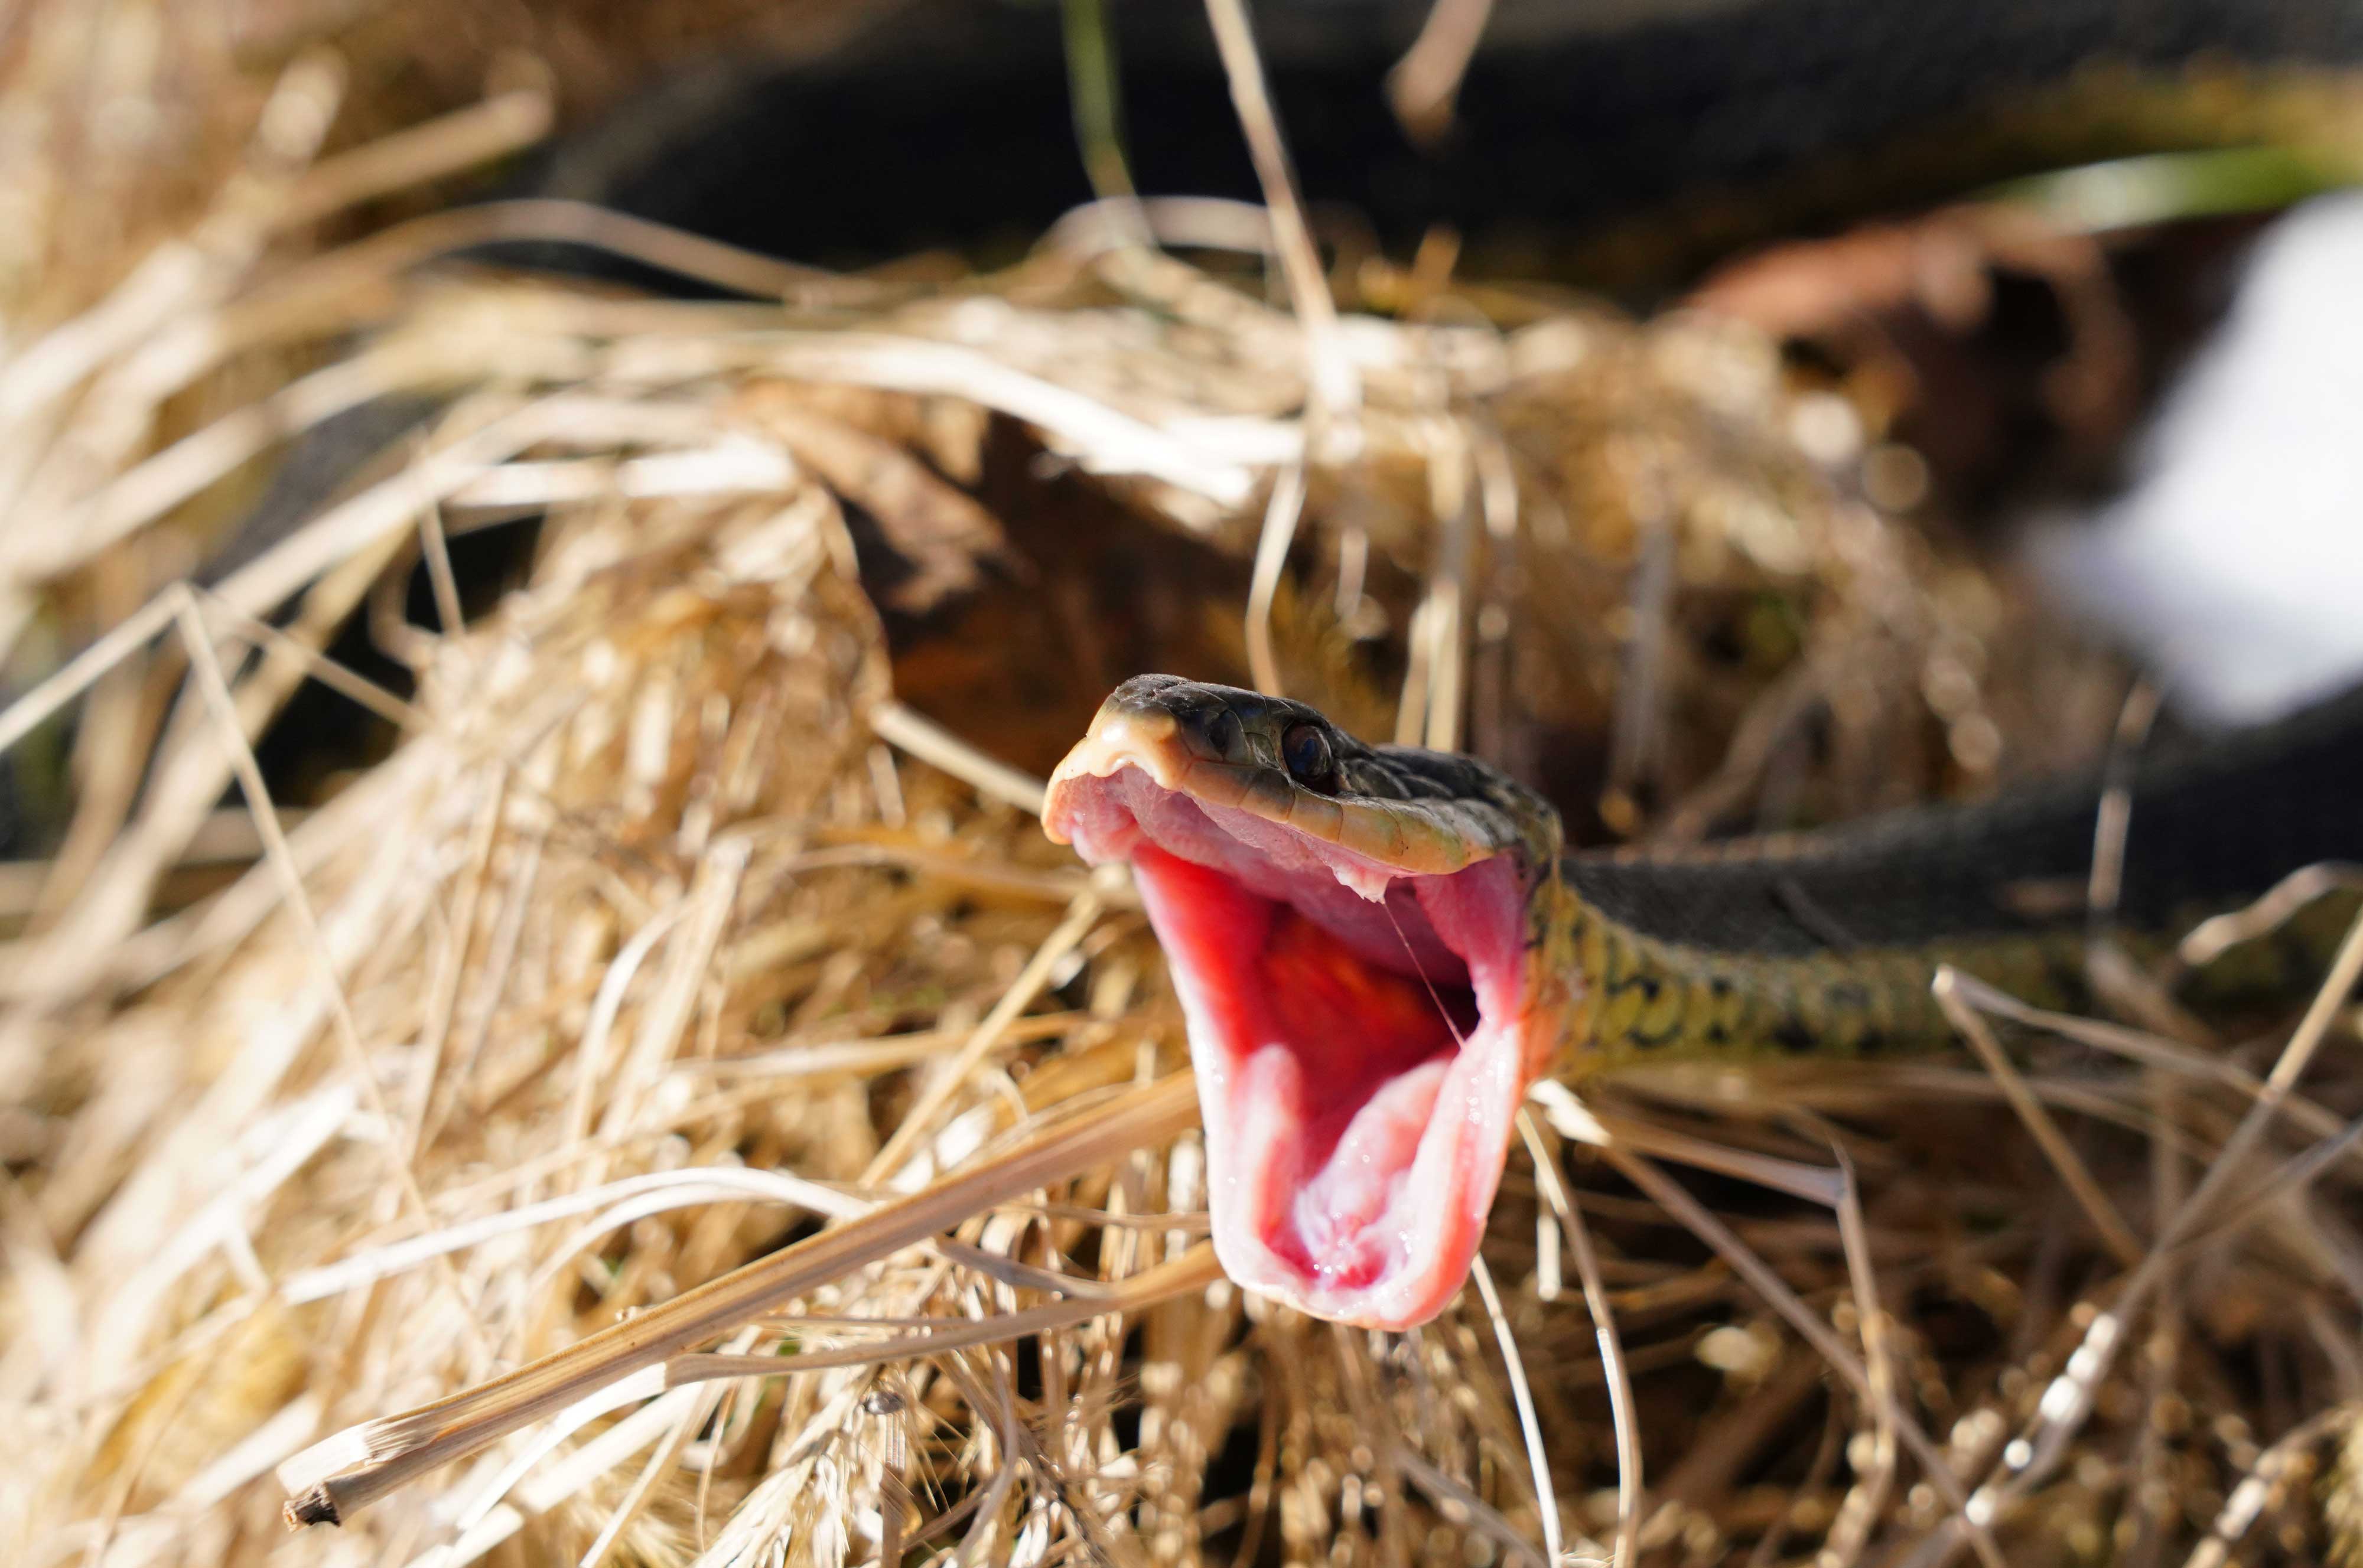 A garter snake with its mouth open.